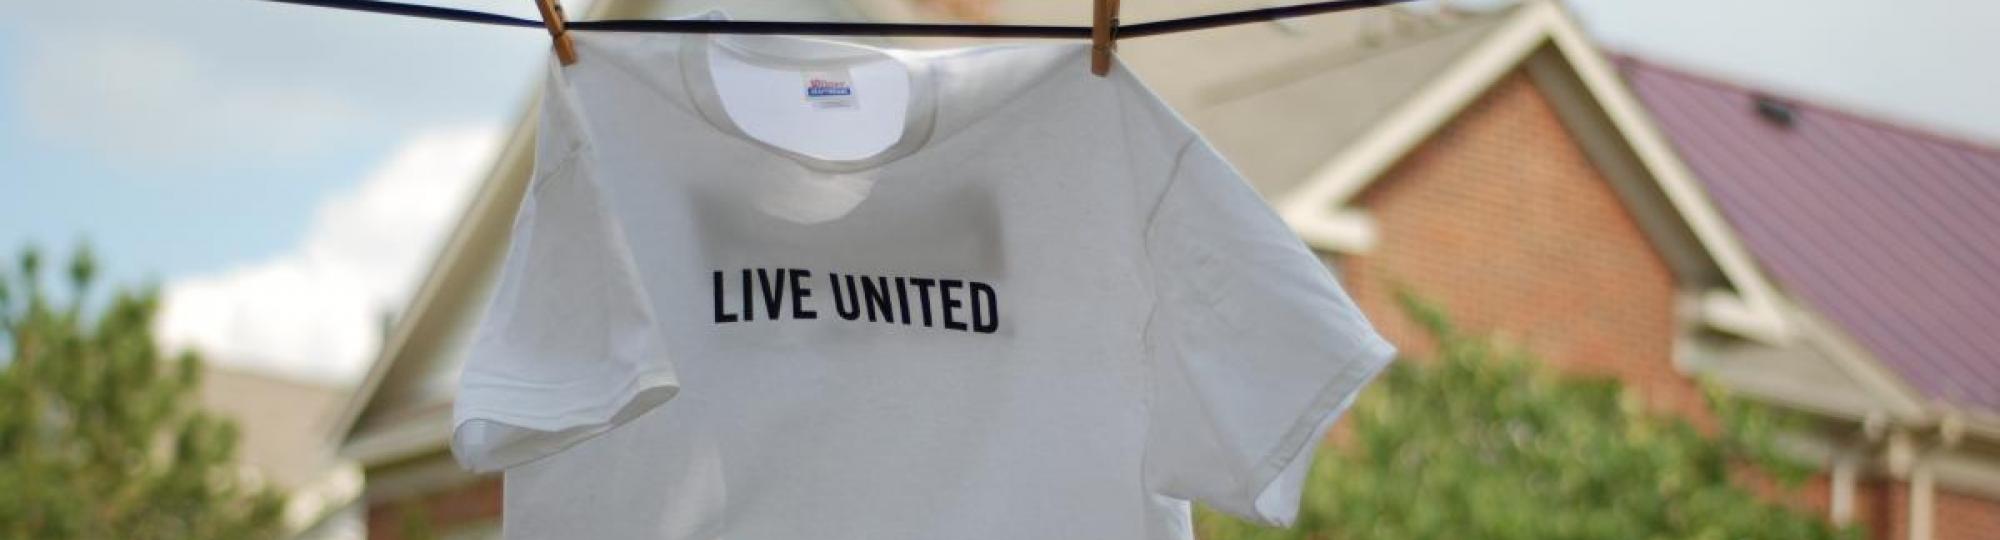 LIVE UNITED tshirt hanging on a clothes line.